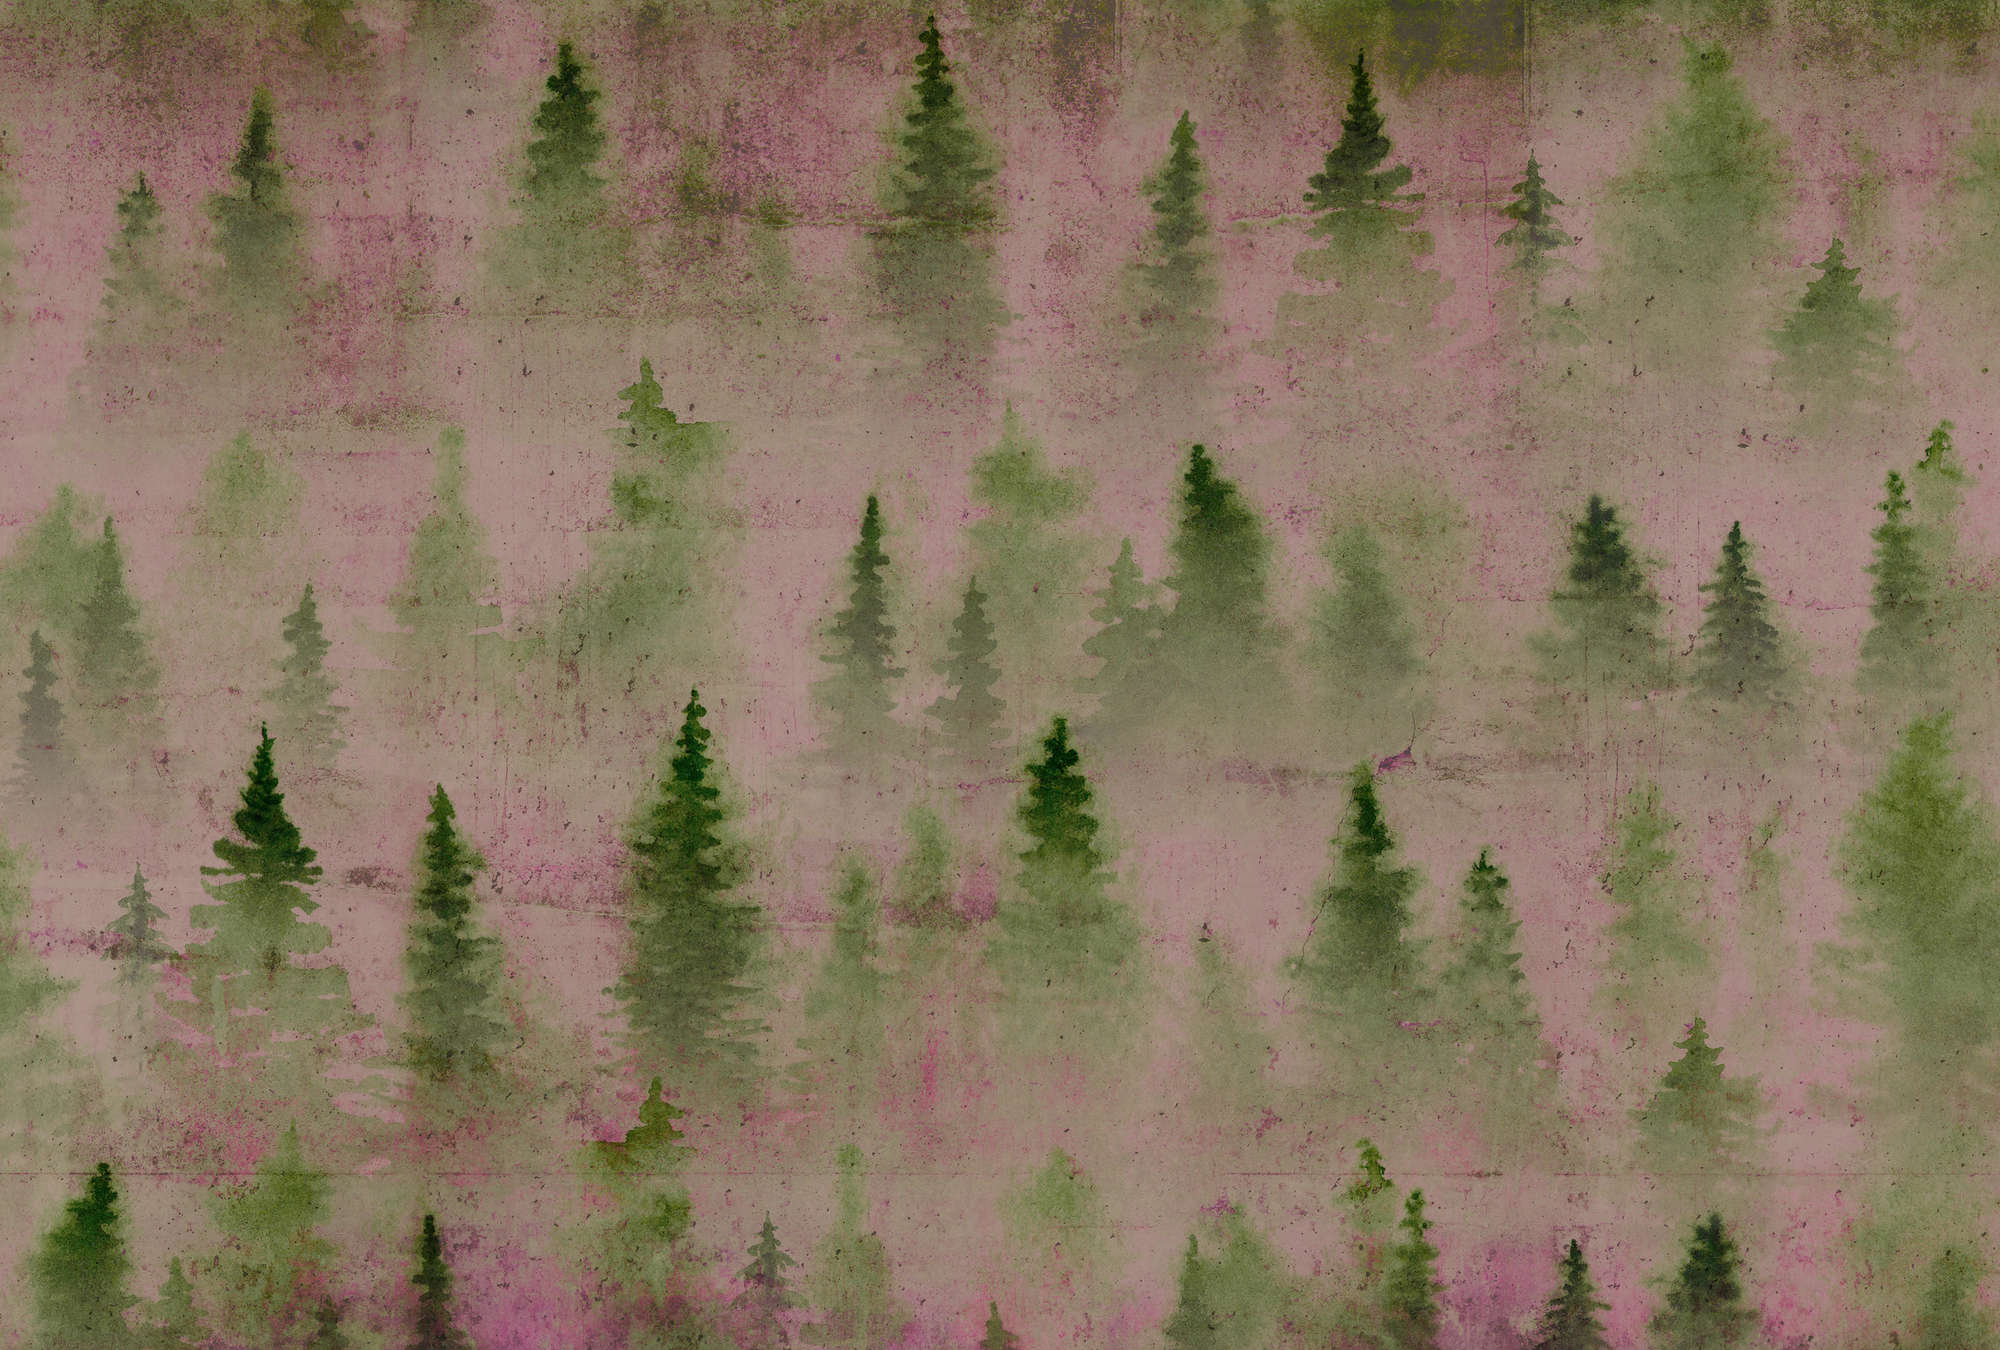             Photo wallpaper concrete with forest fashion & used look - green, purple, pink
        